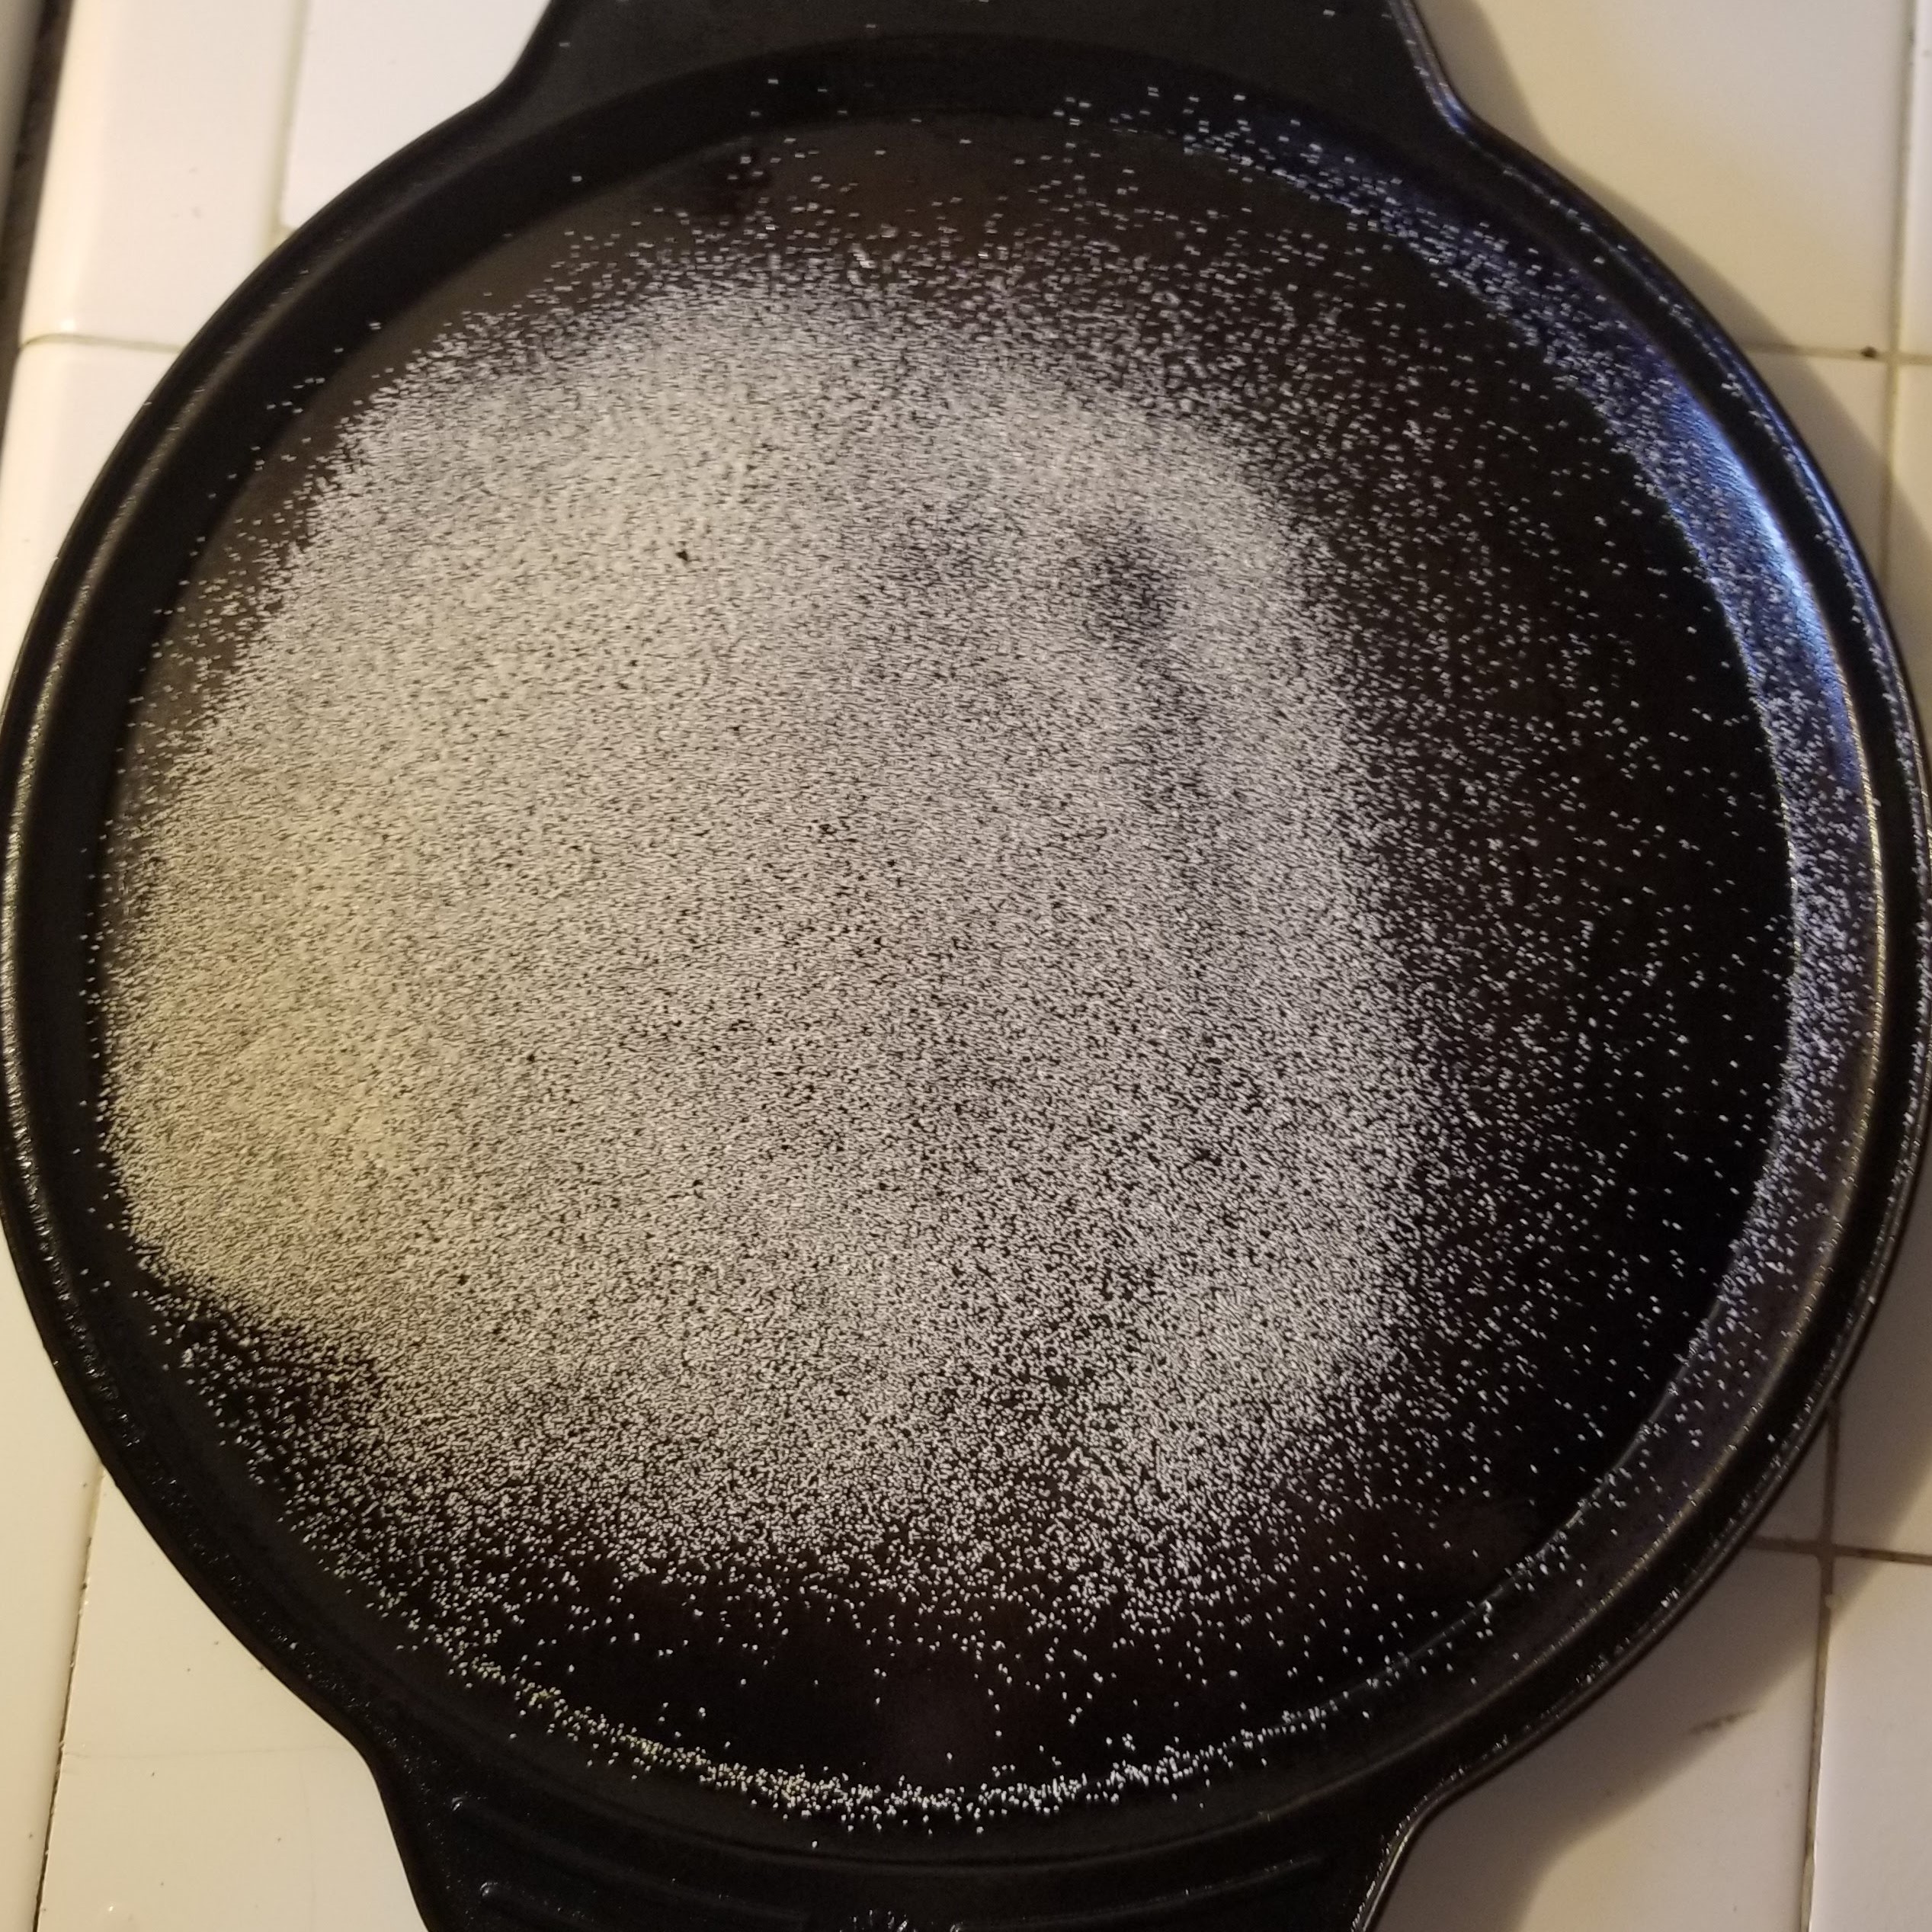 A round baking pan with semolina flour dusted across it.